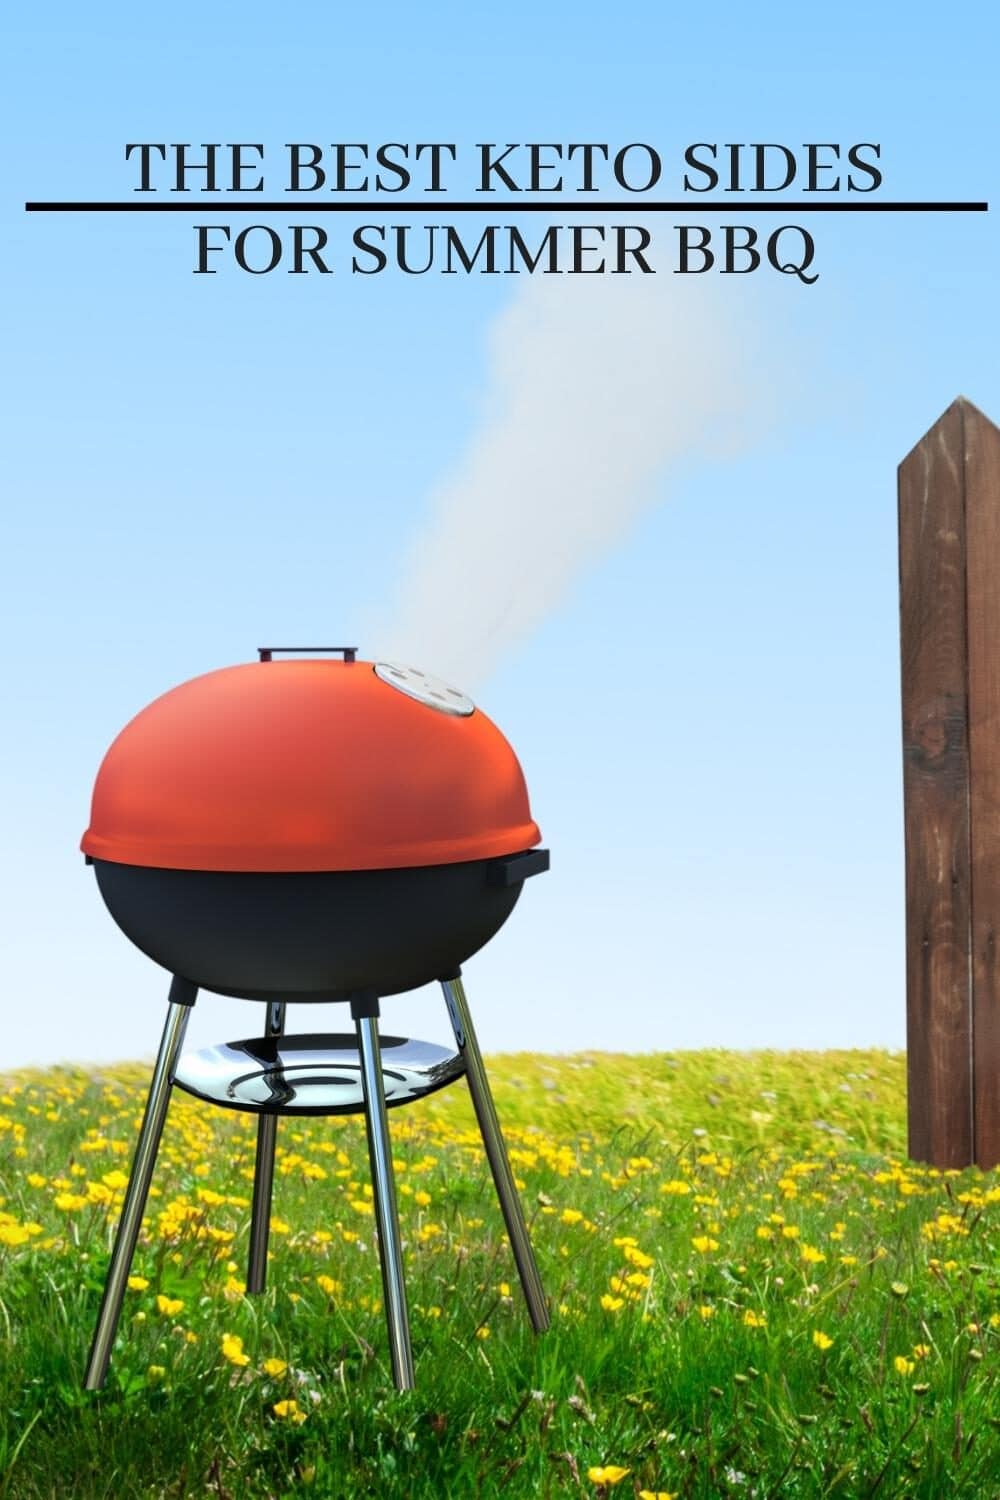 A picturesque summer BBQ scene set against a backdrop of blue skies and vibrant nature. A red grill takes center stage, emanating warmth and anticipation. In the foreground, a field of yellow flowers adds a pop of color, while a charming brown picket fence frames the scene. The image captures the essence of a sunny outdoor gathering, evoking feelings of relaxation, joy, and the delicious aromas of grilled food